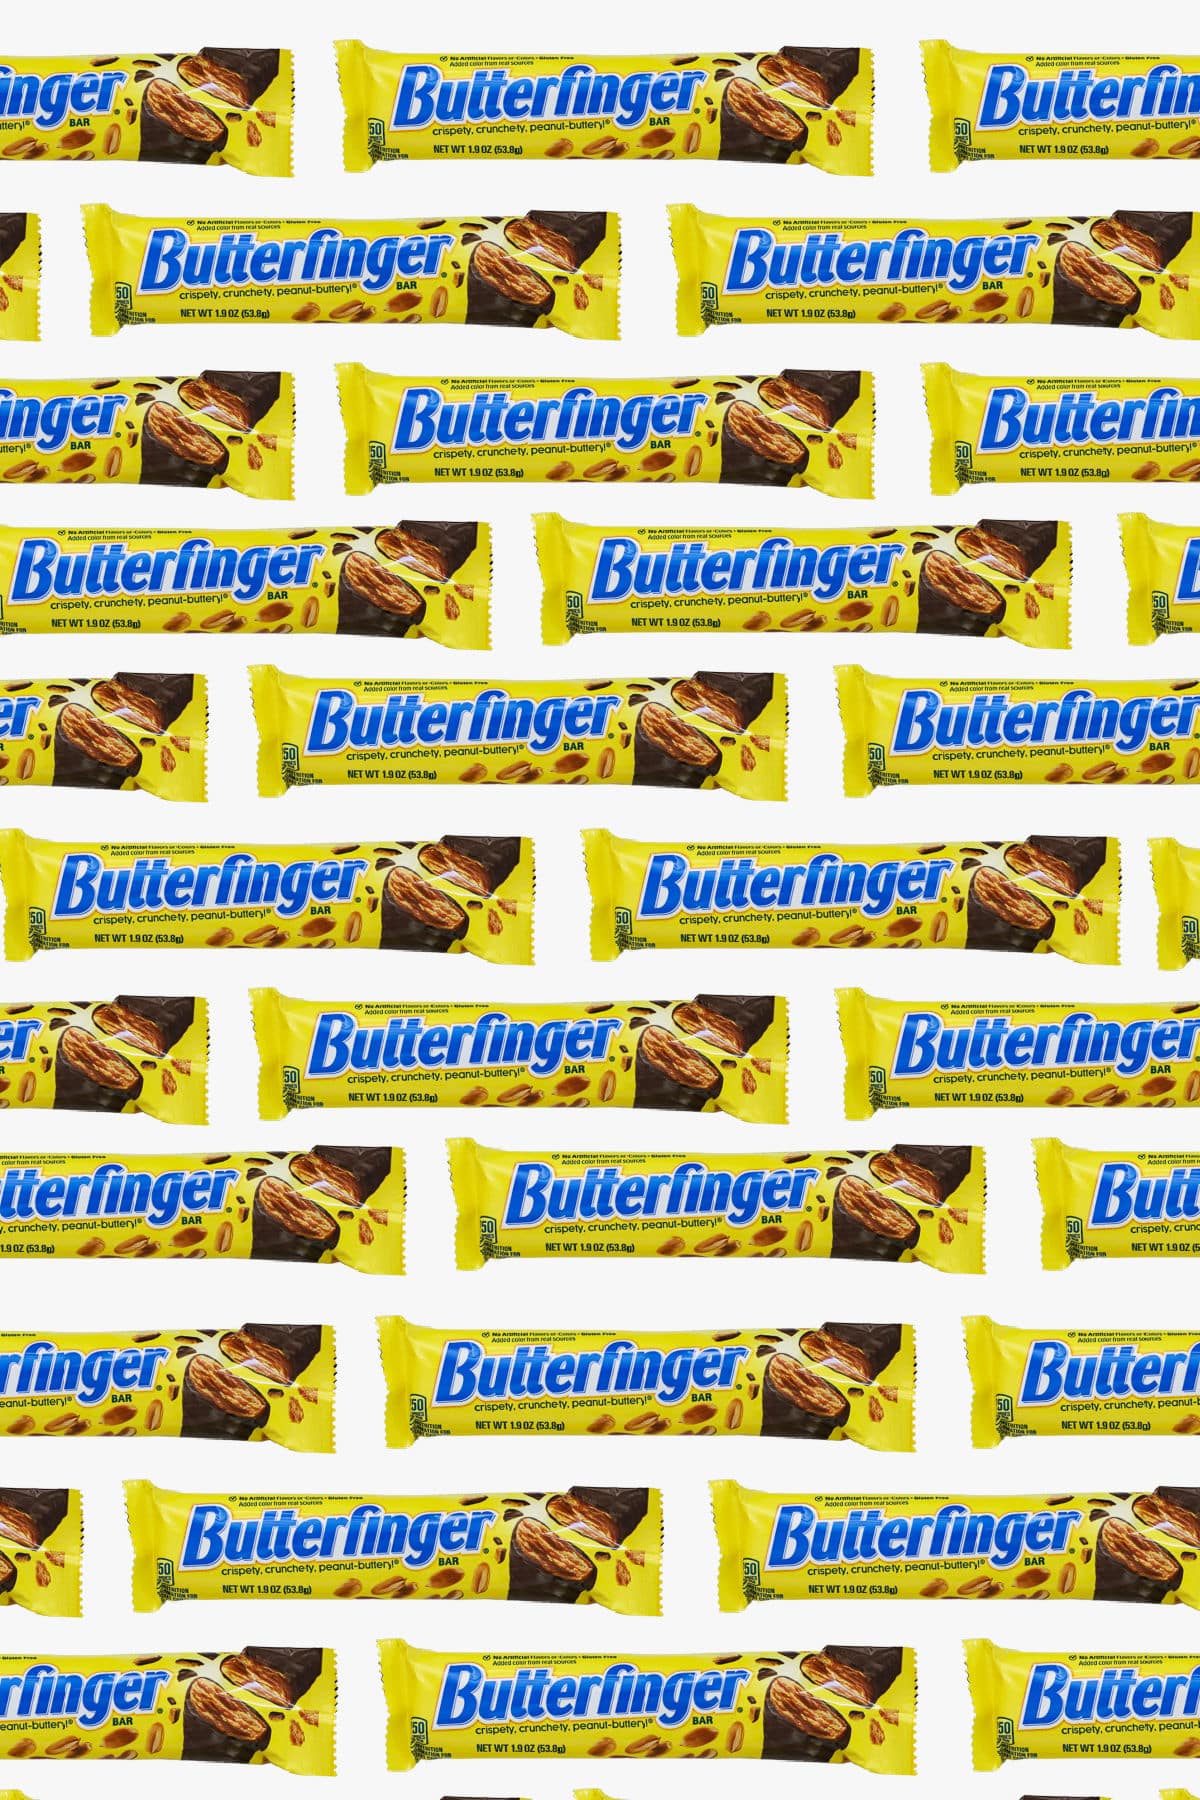 Butterfinger candy bars on a white background